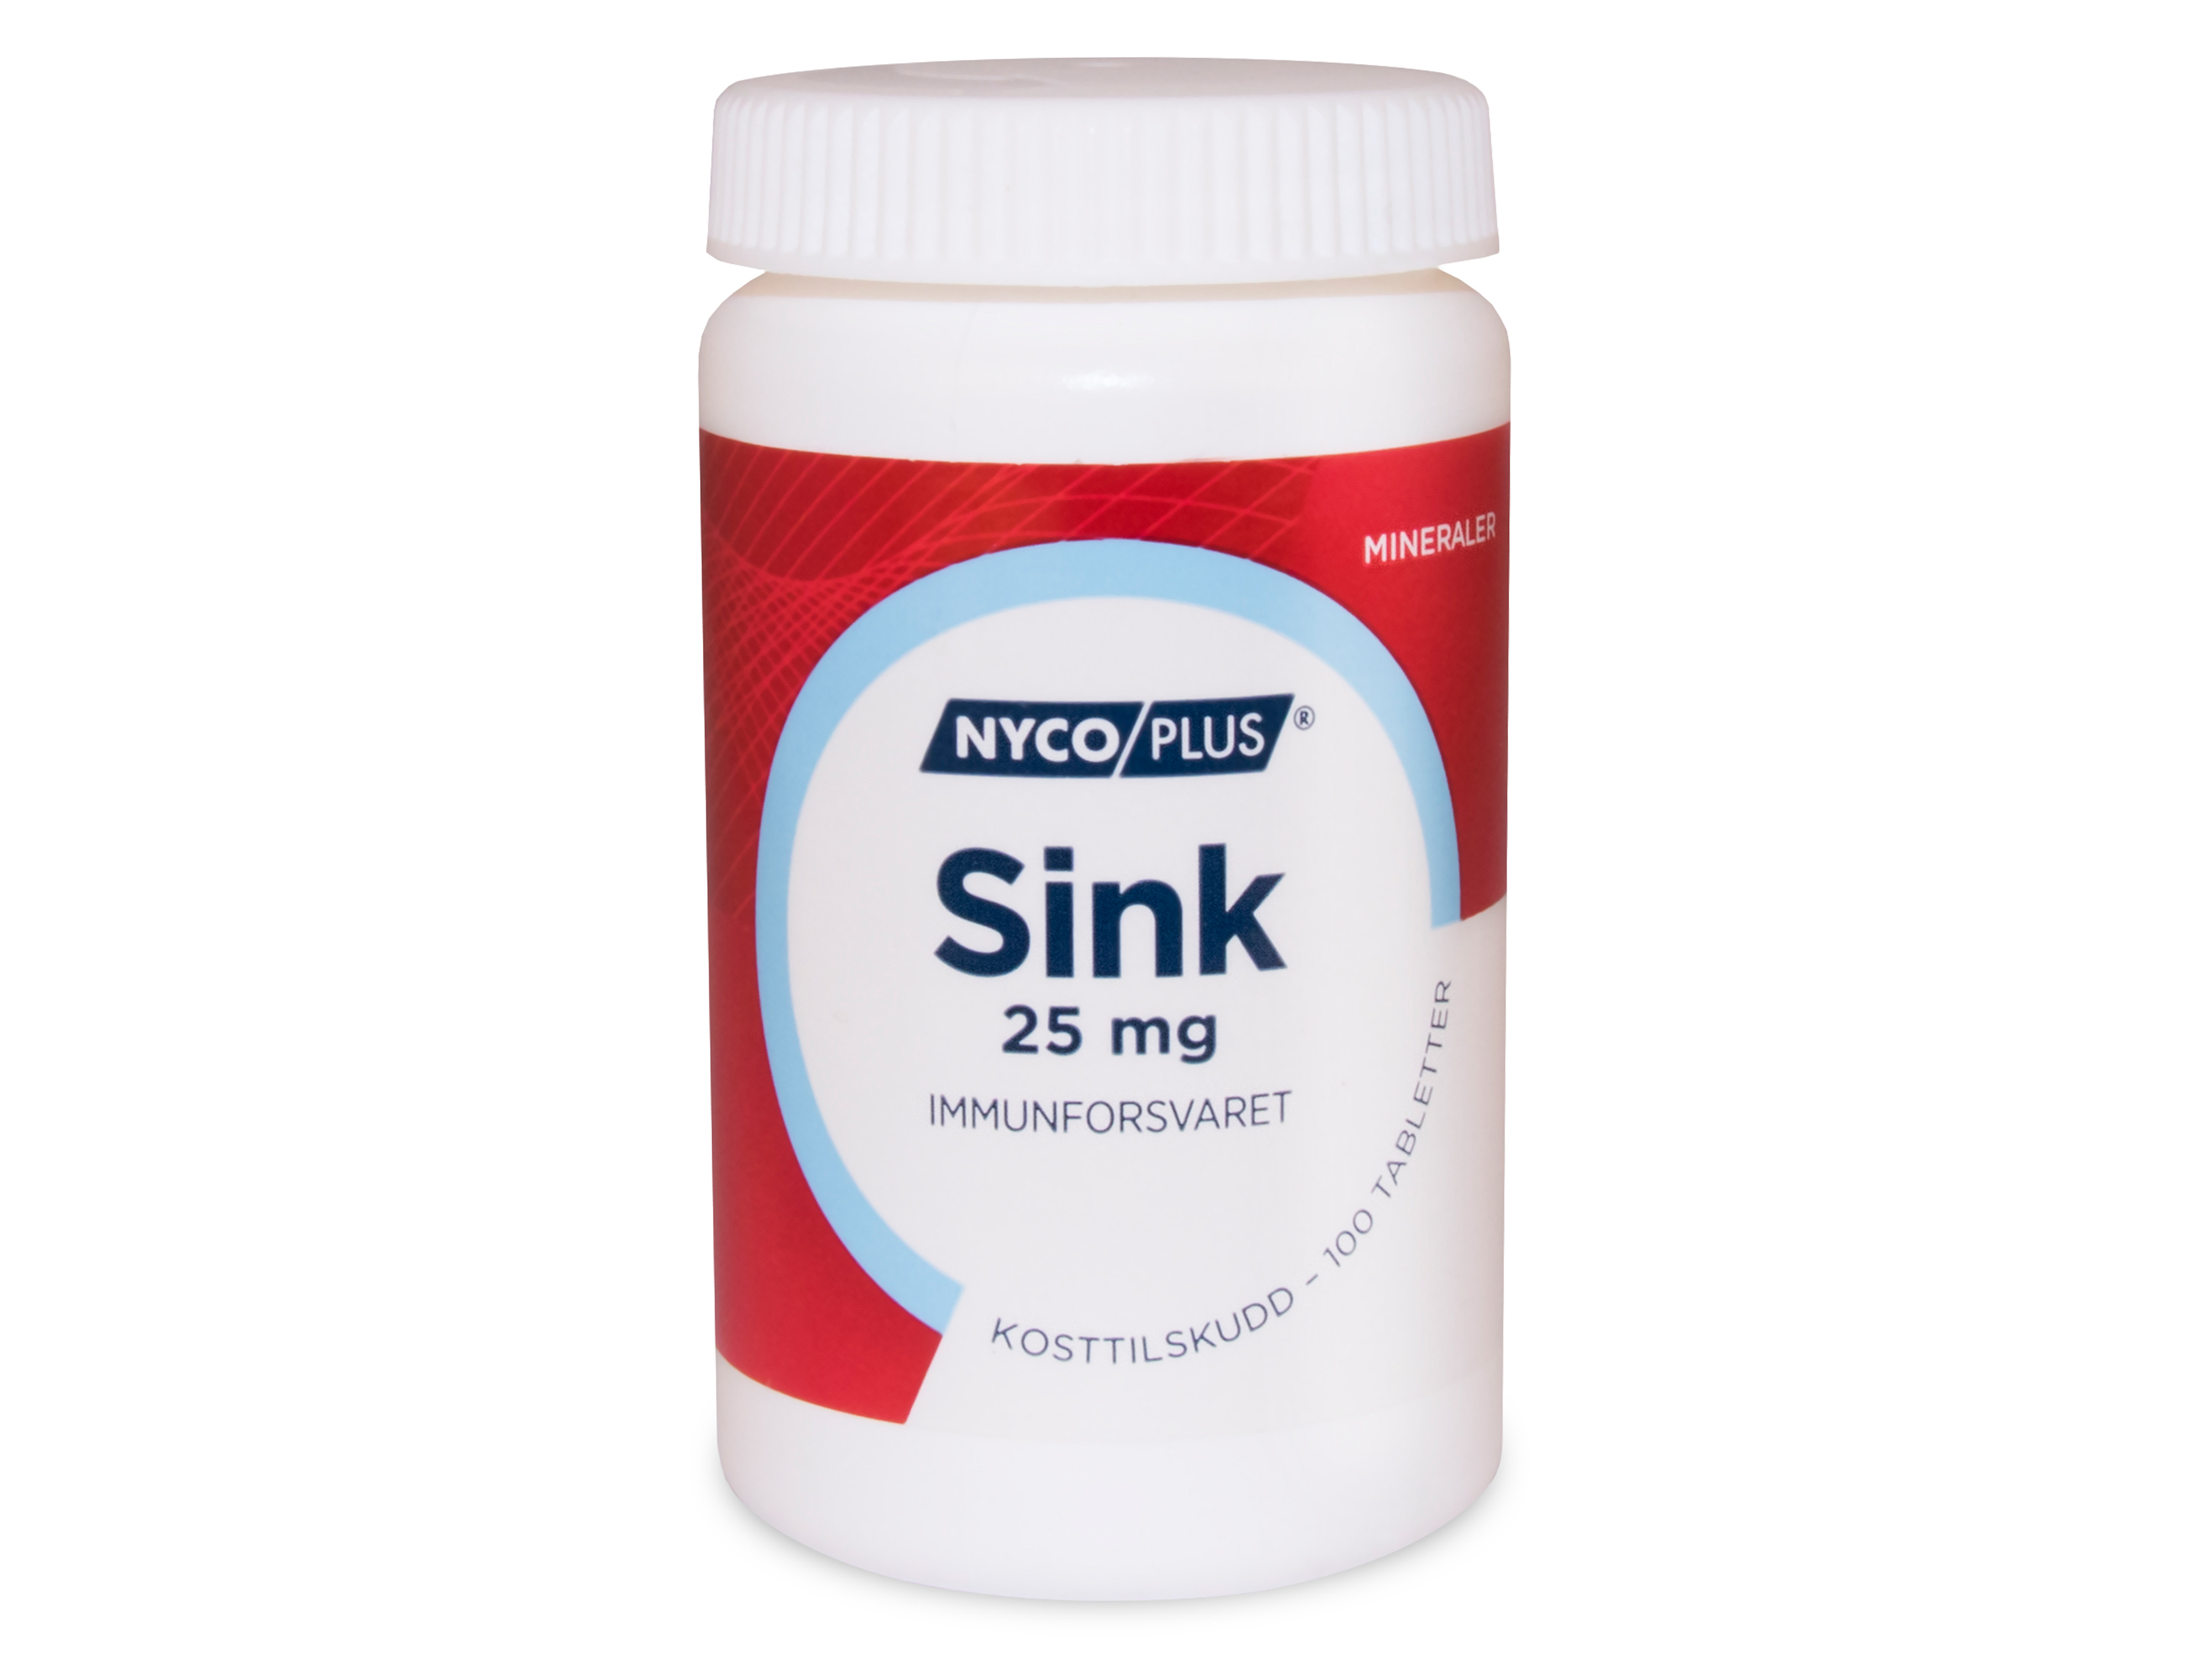 Nycoplus Sink 25 mg, 100 tabletter